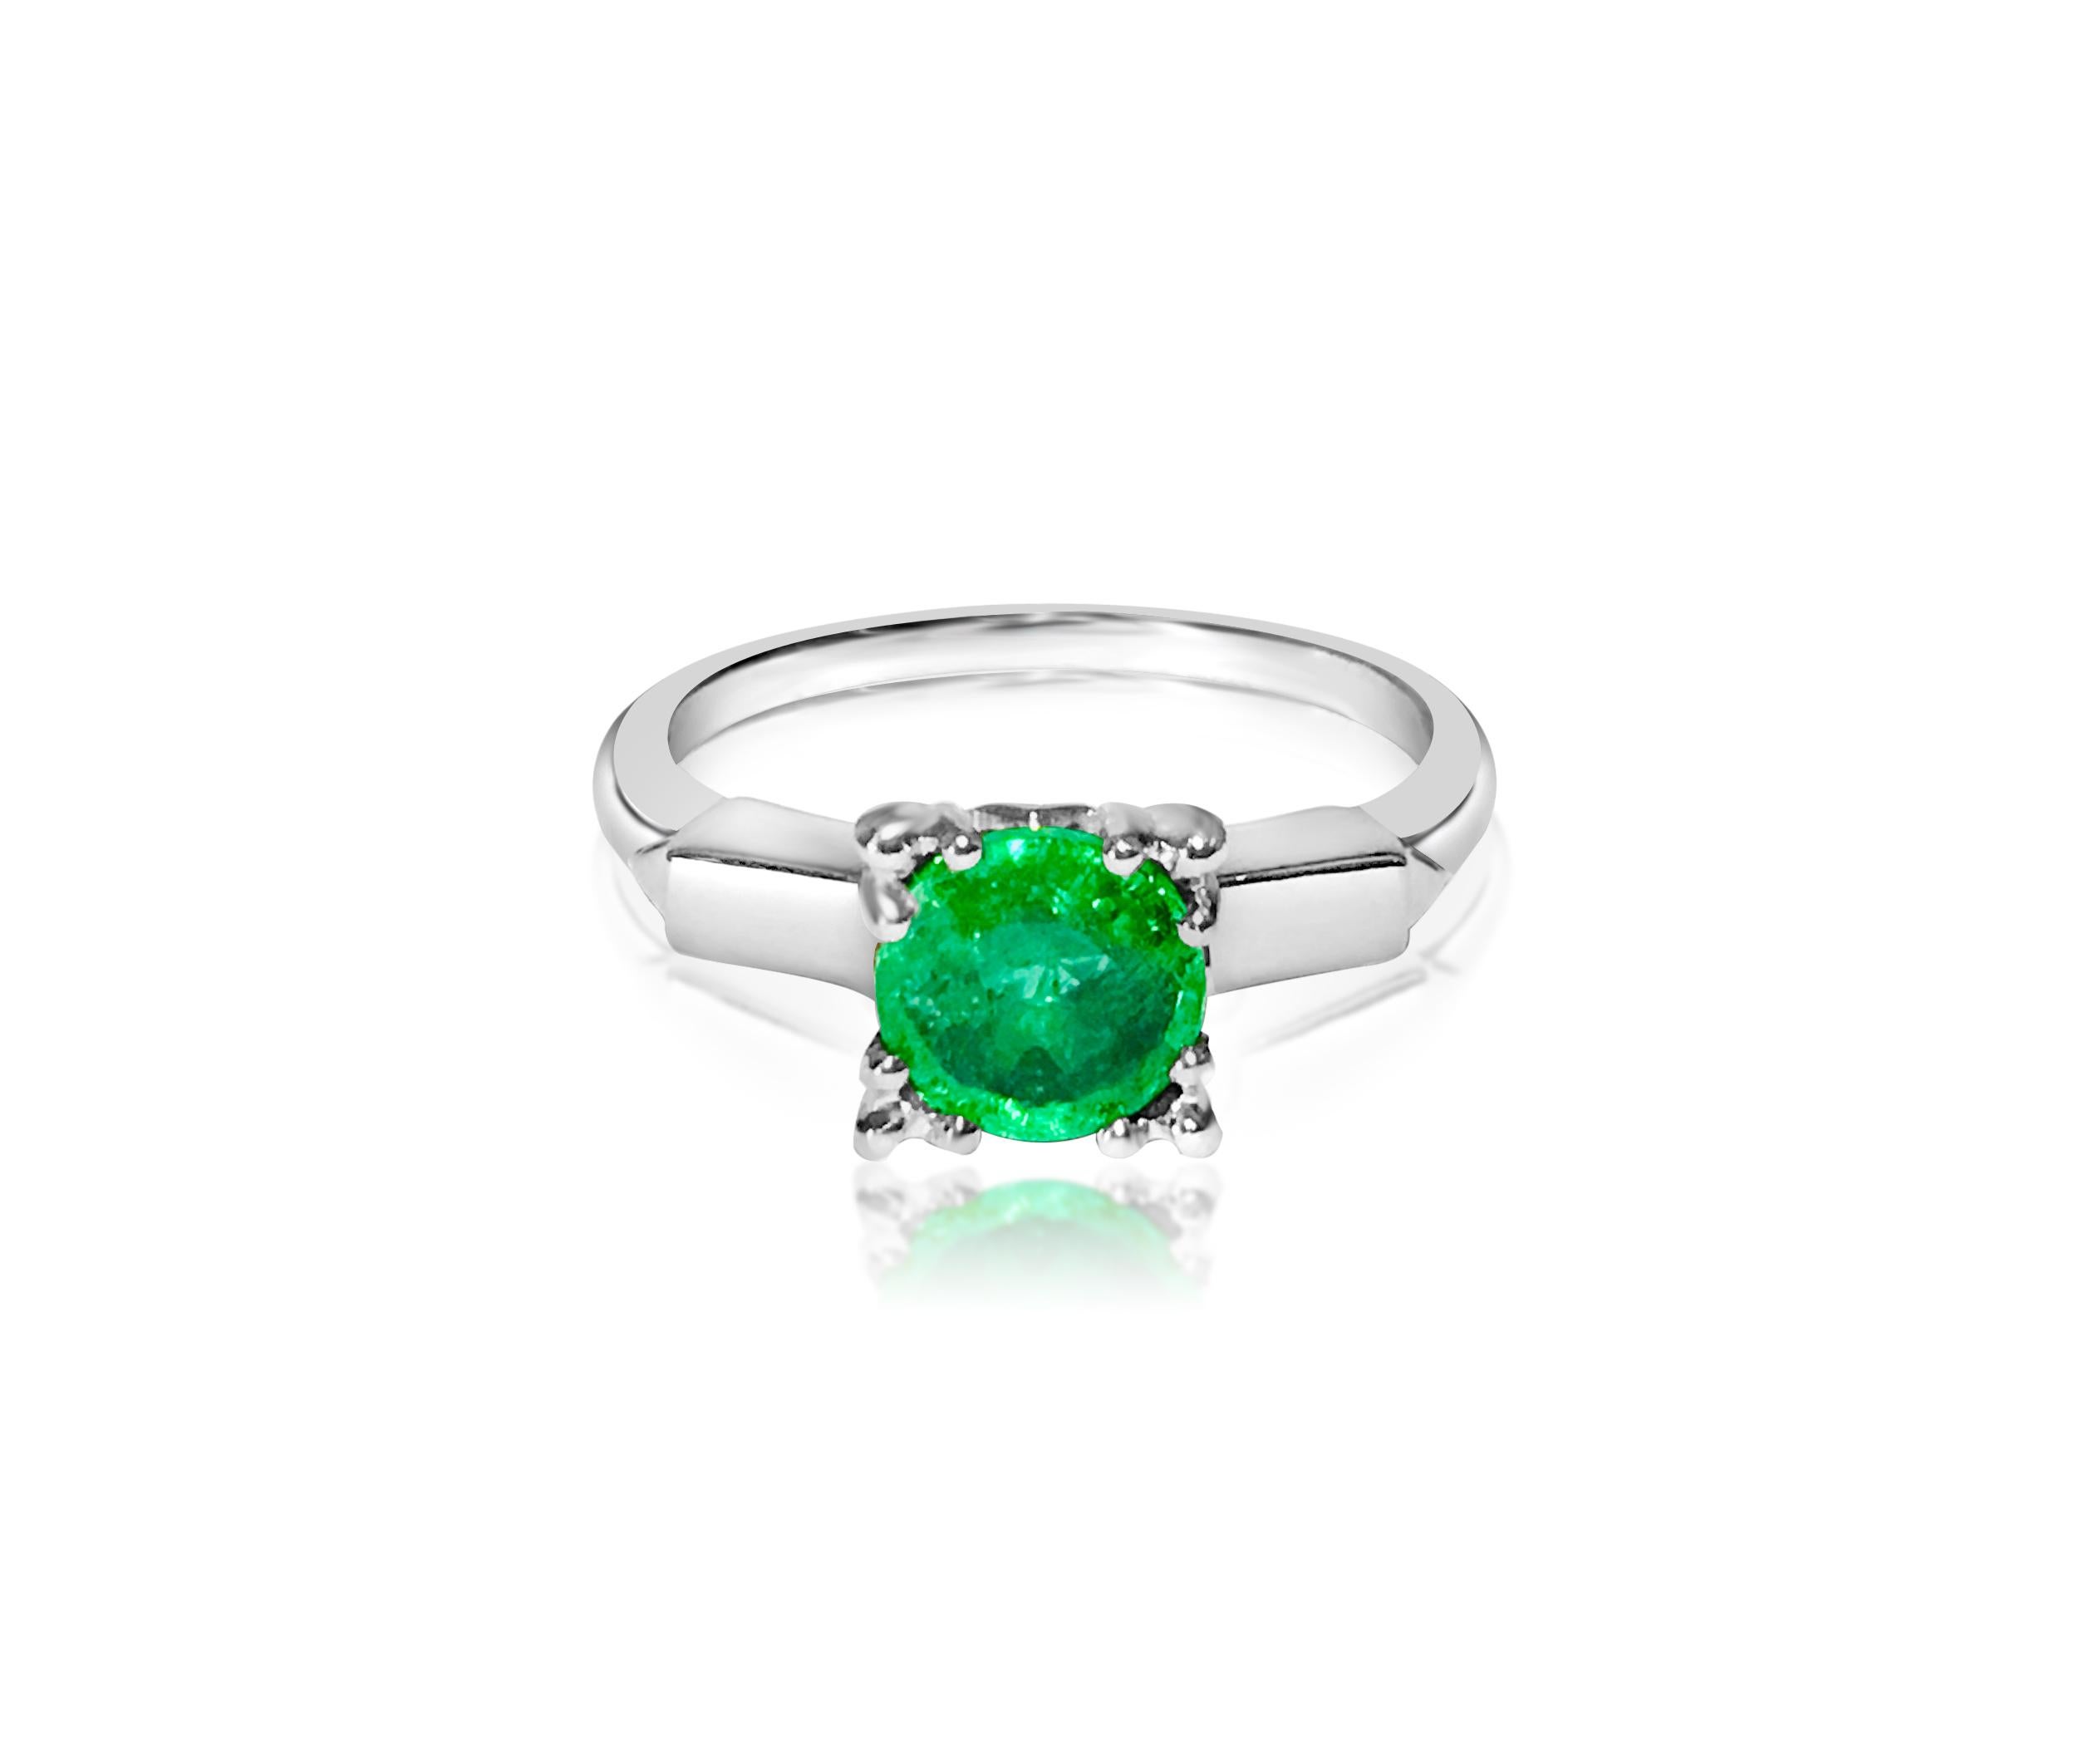 This exquisite vintage ring features a captivating 2.00-carat emerald, showcasing a stunning intense green hue that mesmerizes the beholder. Crafted from platinum, this ring exudes elegance and sophistication, with its unique design setting it apart